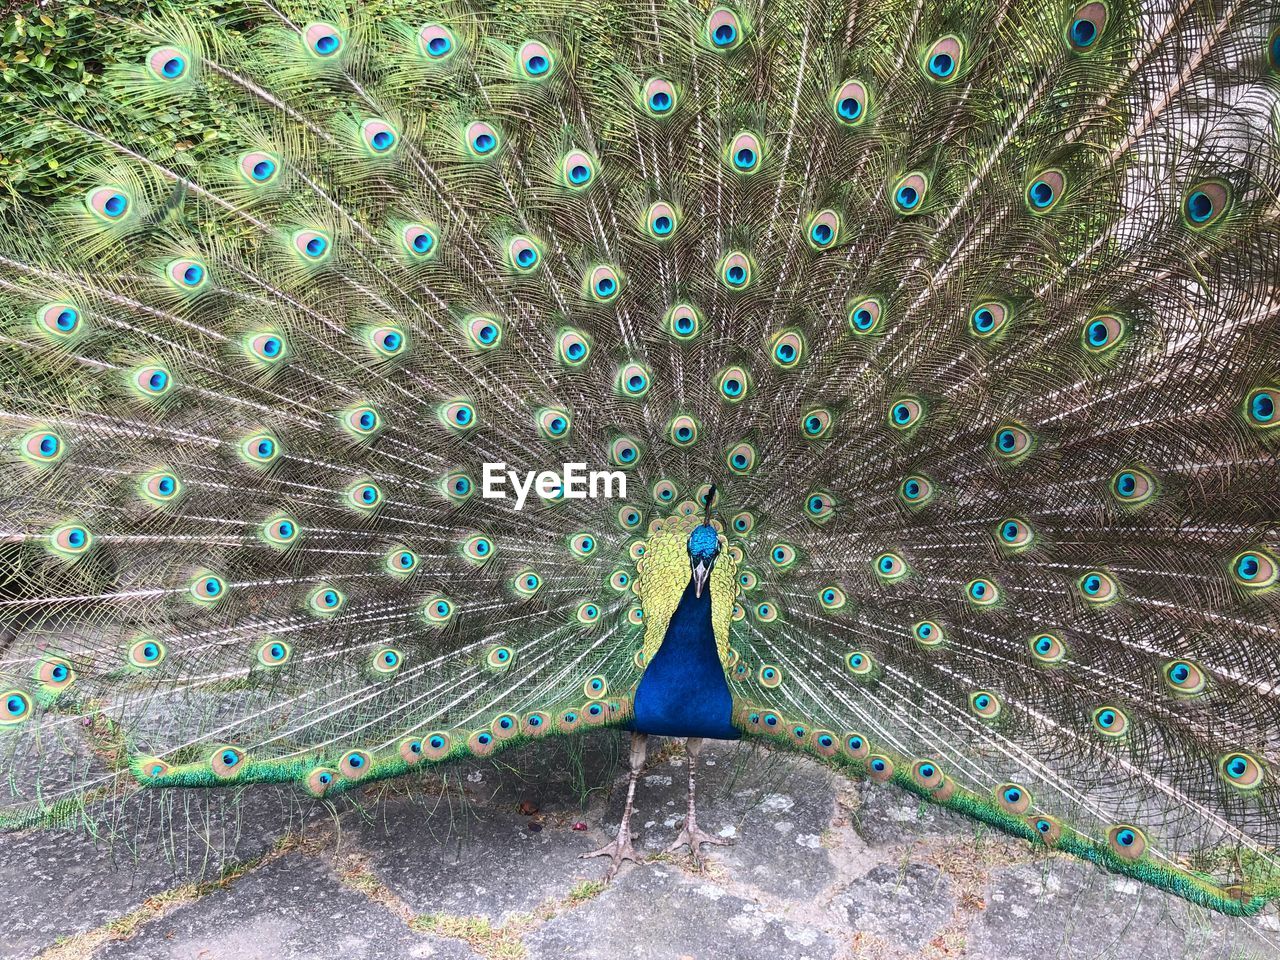 CLOSE-UP OF PEACOCK WITH FEATHERS